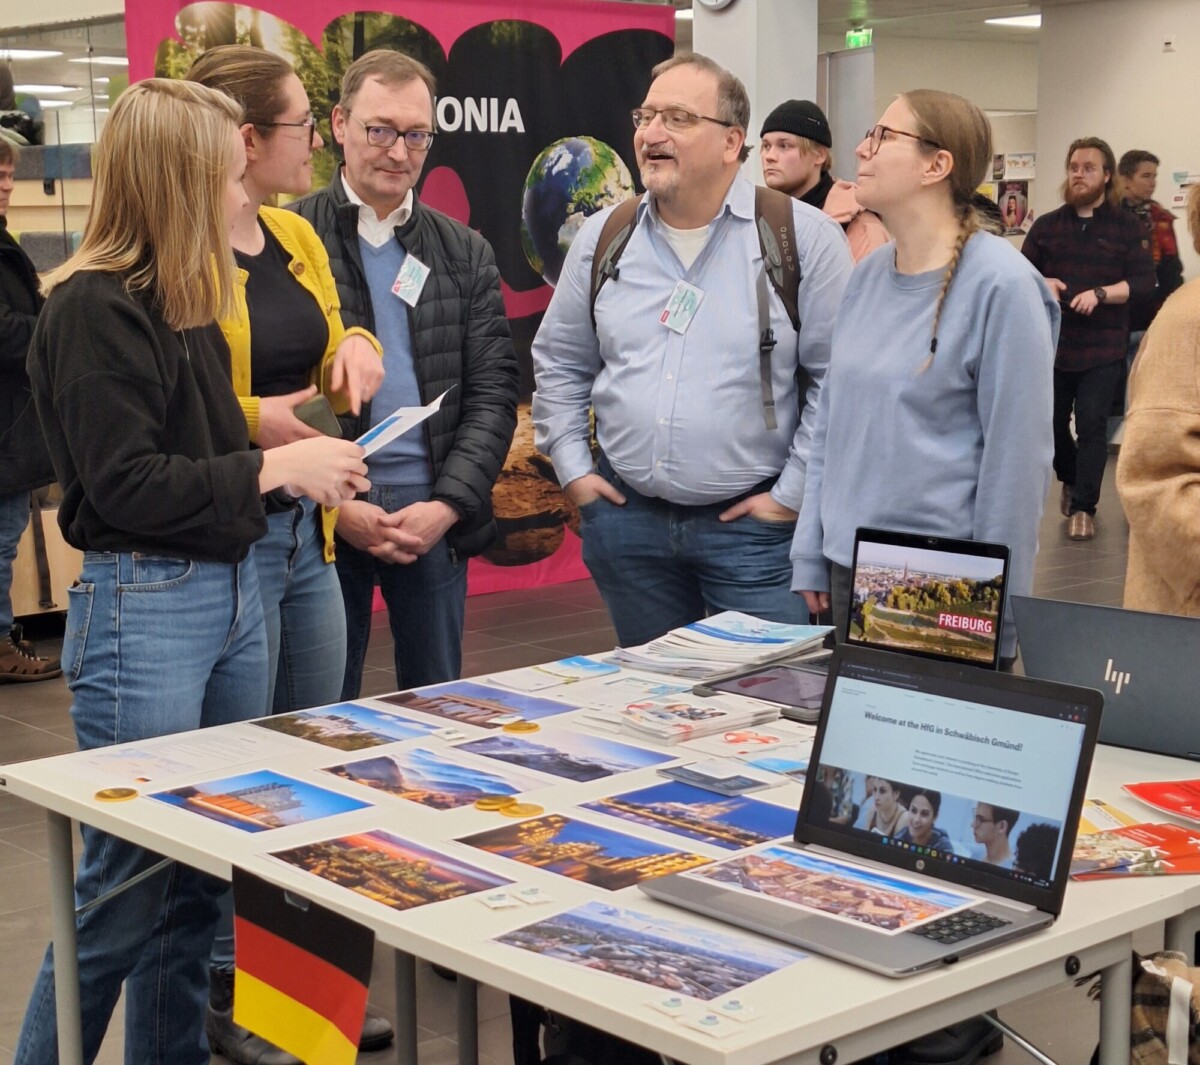 During the event, students shared information to other students about exchange opportunities, giving them the opportunity to learn about Savonia's international partners and how to include internationality to their studies.